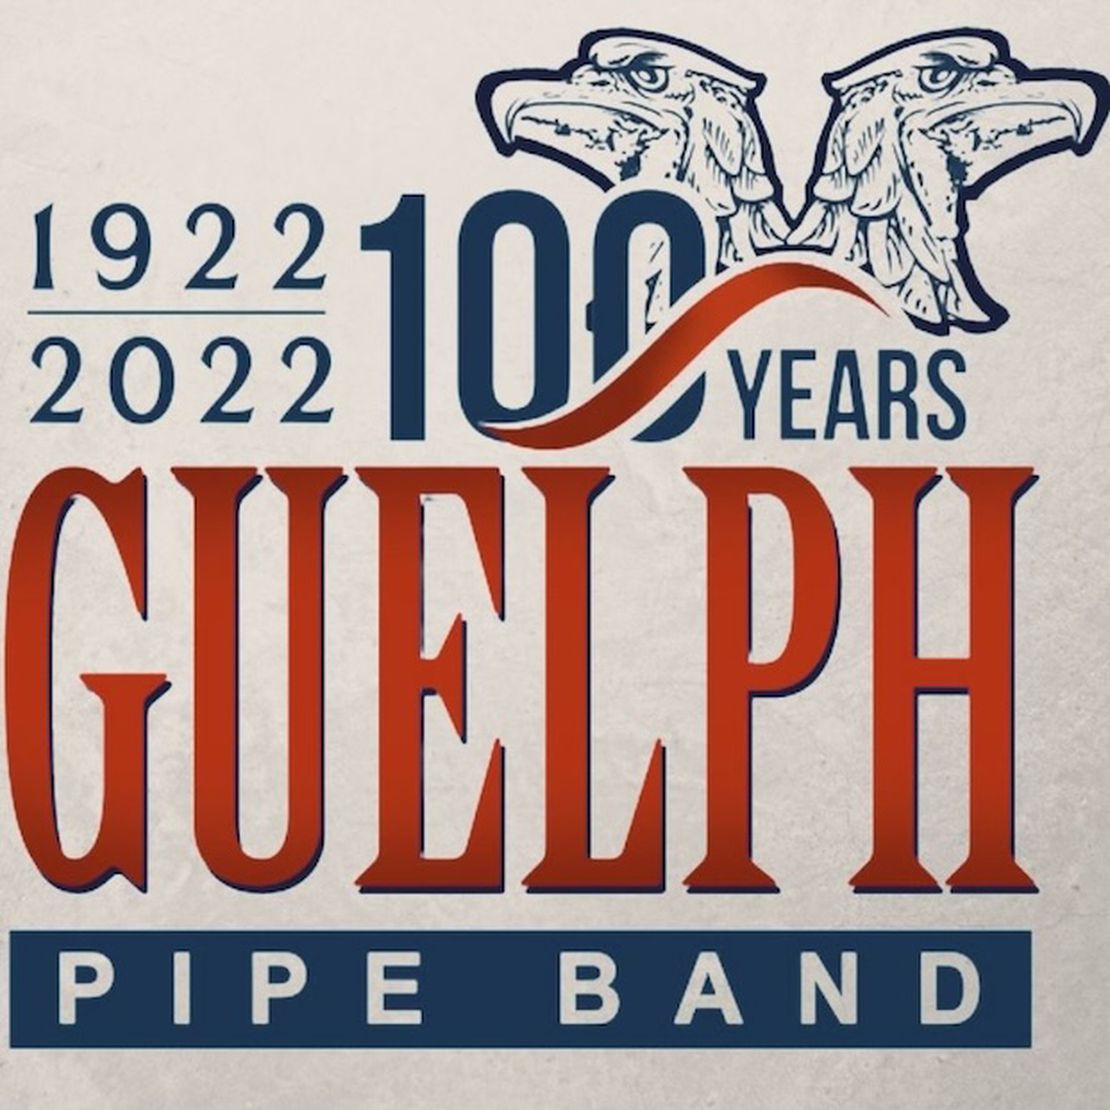 Guelph Pipe Band